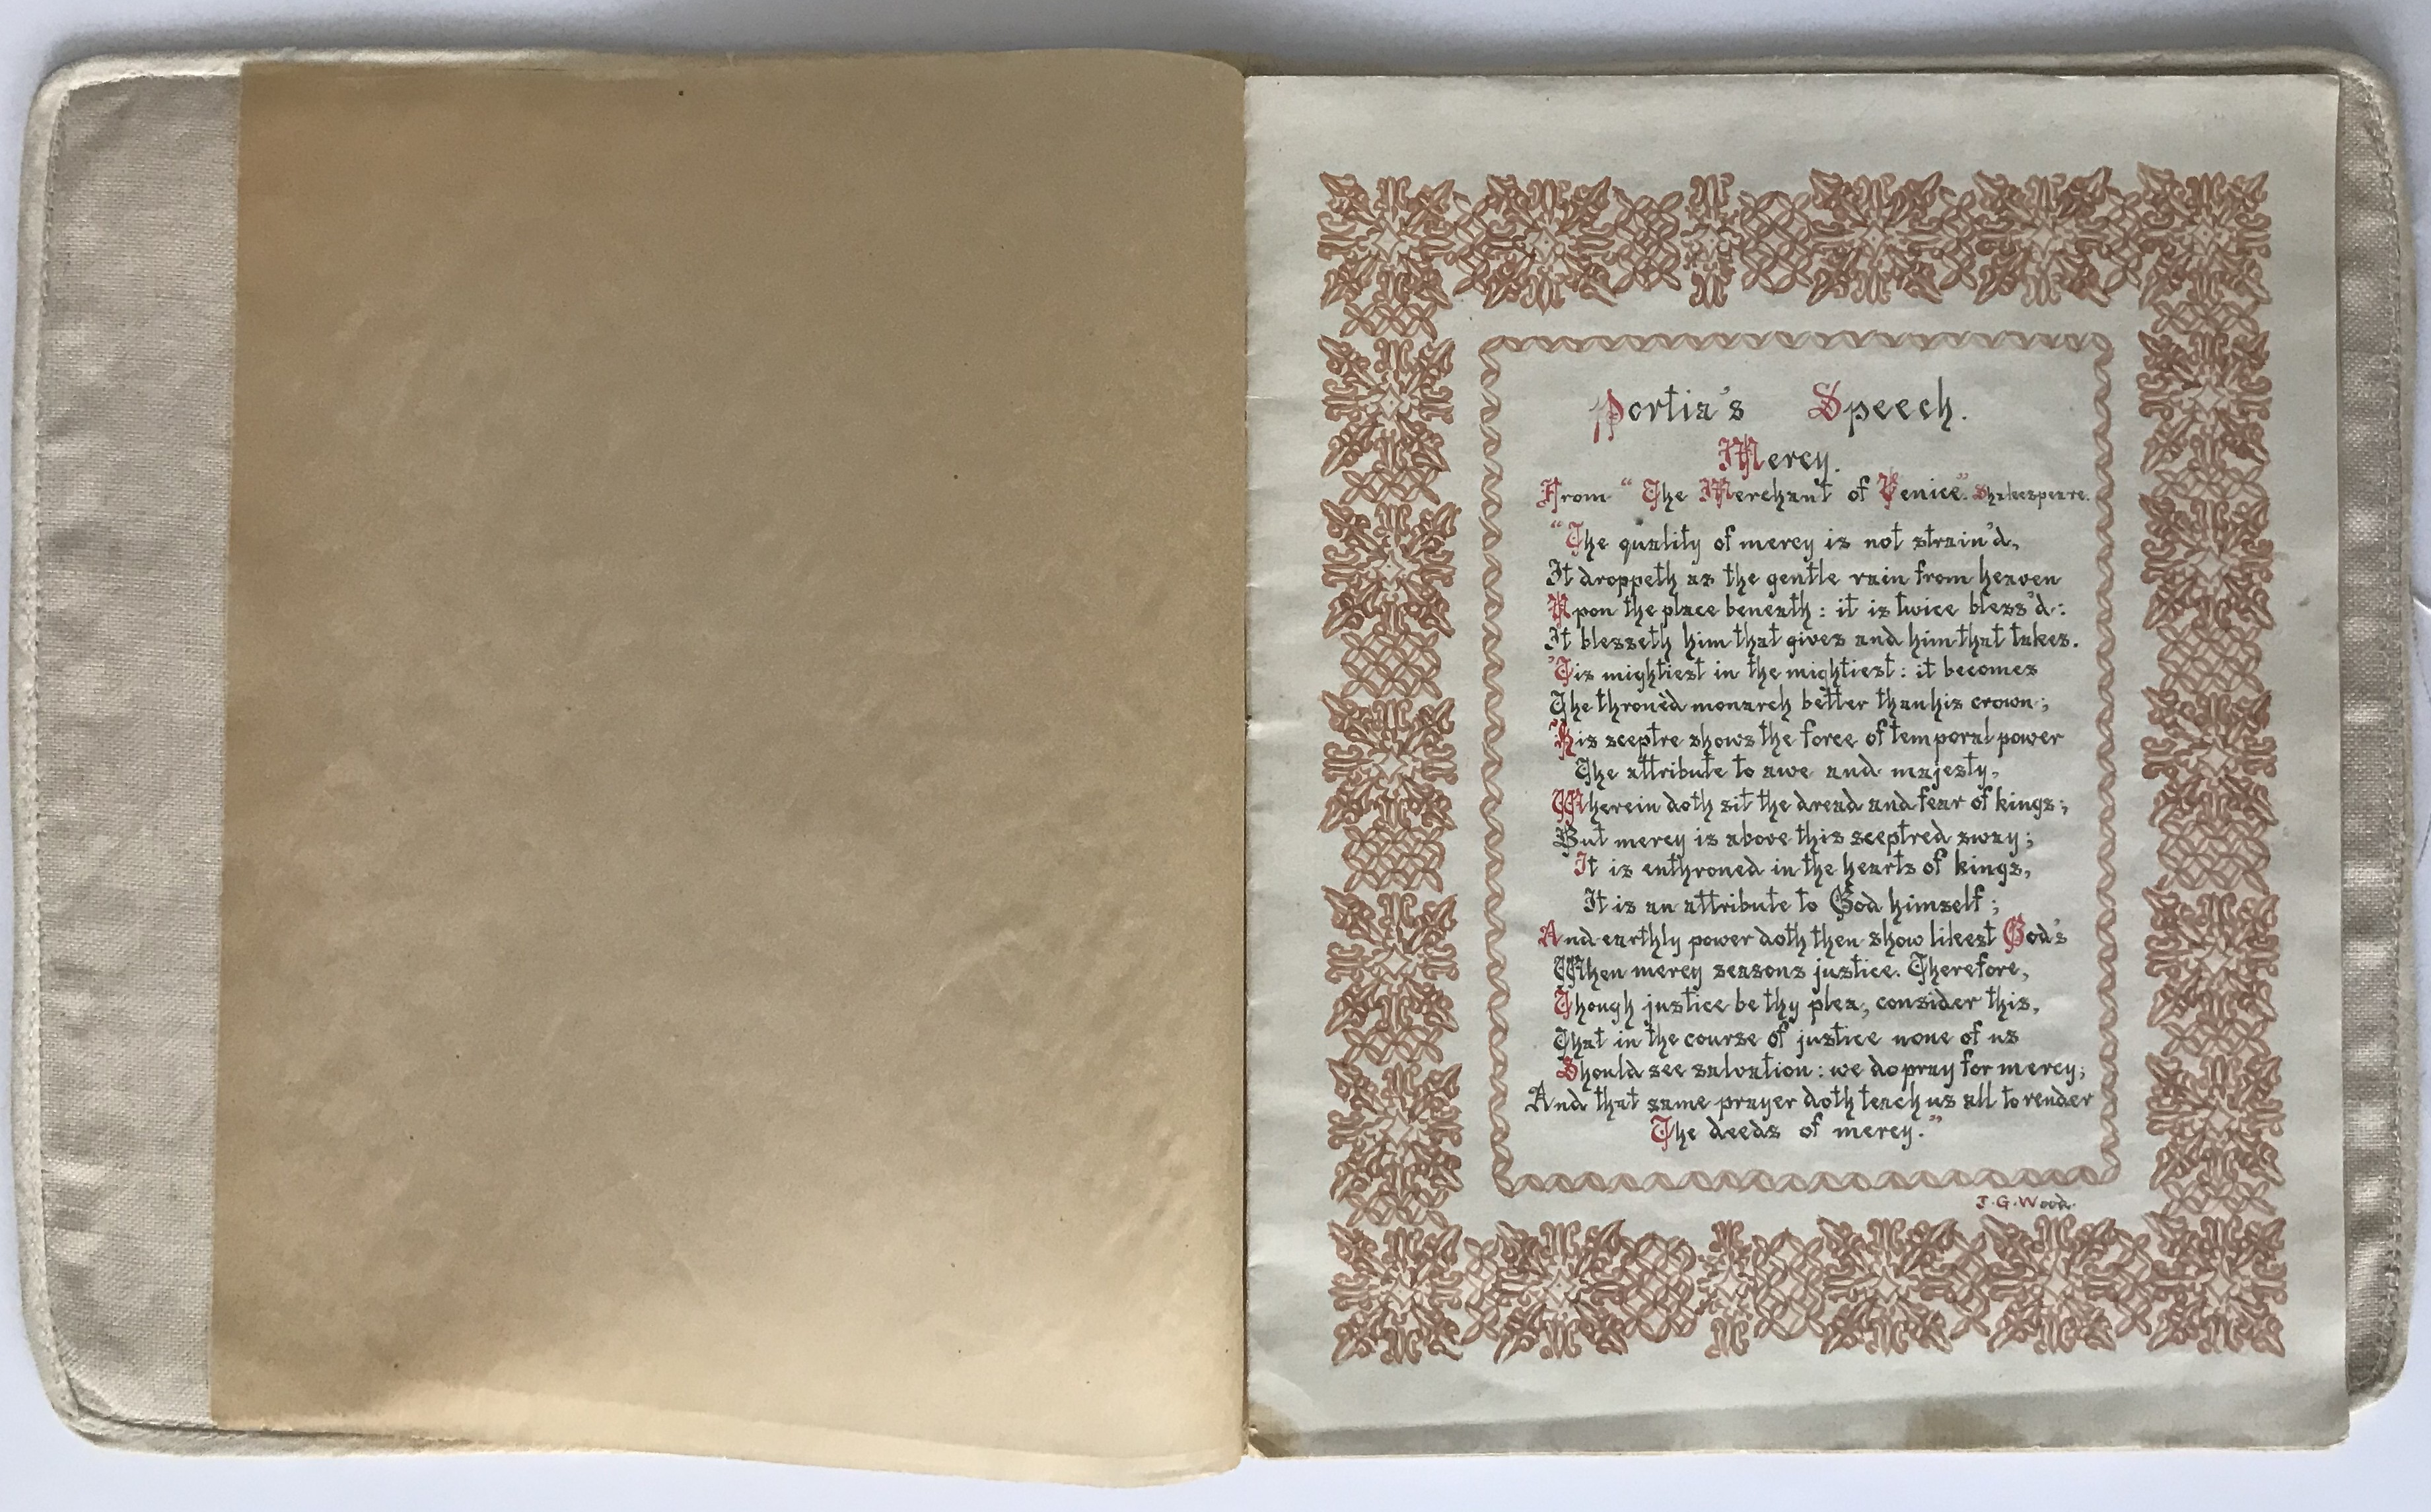 UNUSUAL HANDWRITTEN PORTIR’S SPEECH WITH CLOTH COVERS BY J.G. WOOD - Image 3 of 9